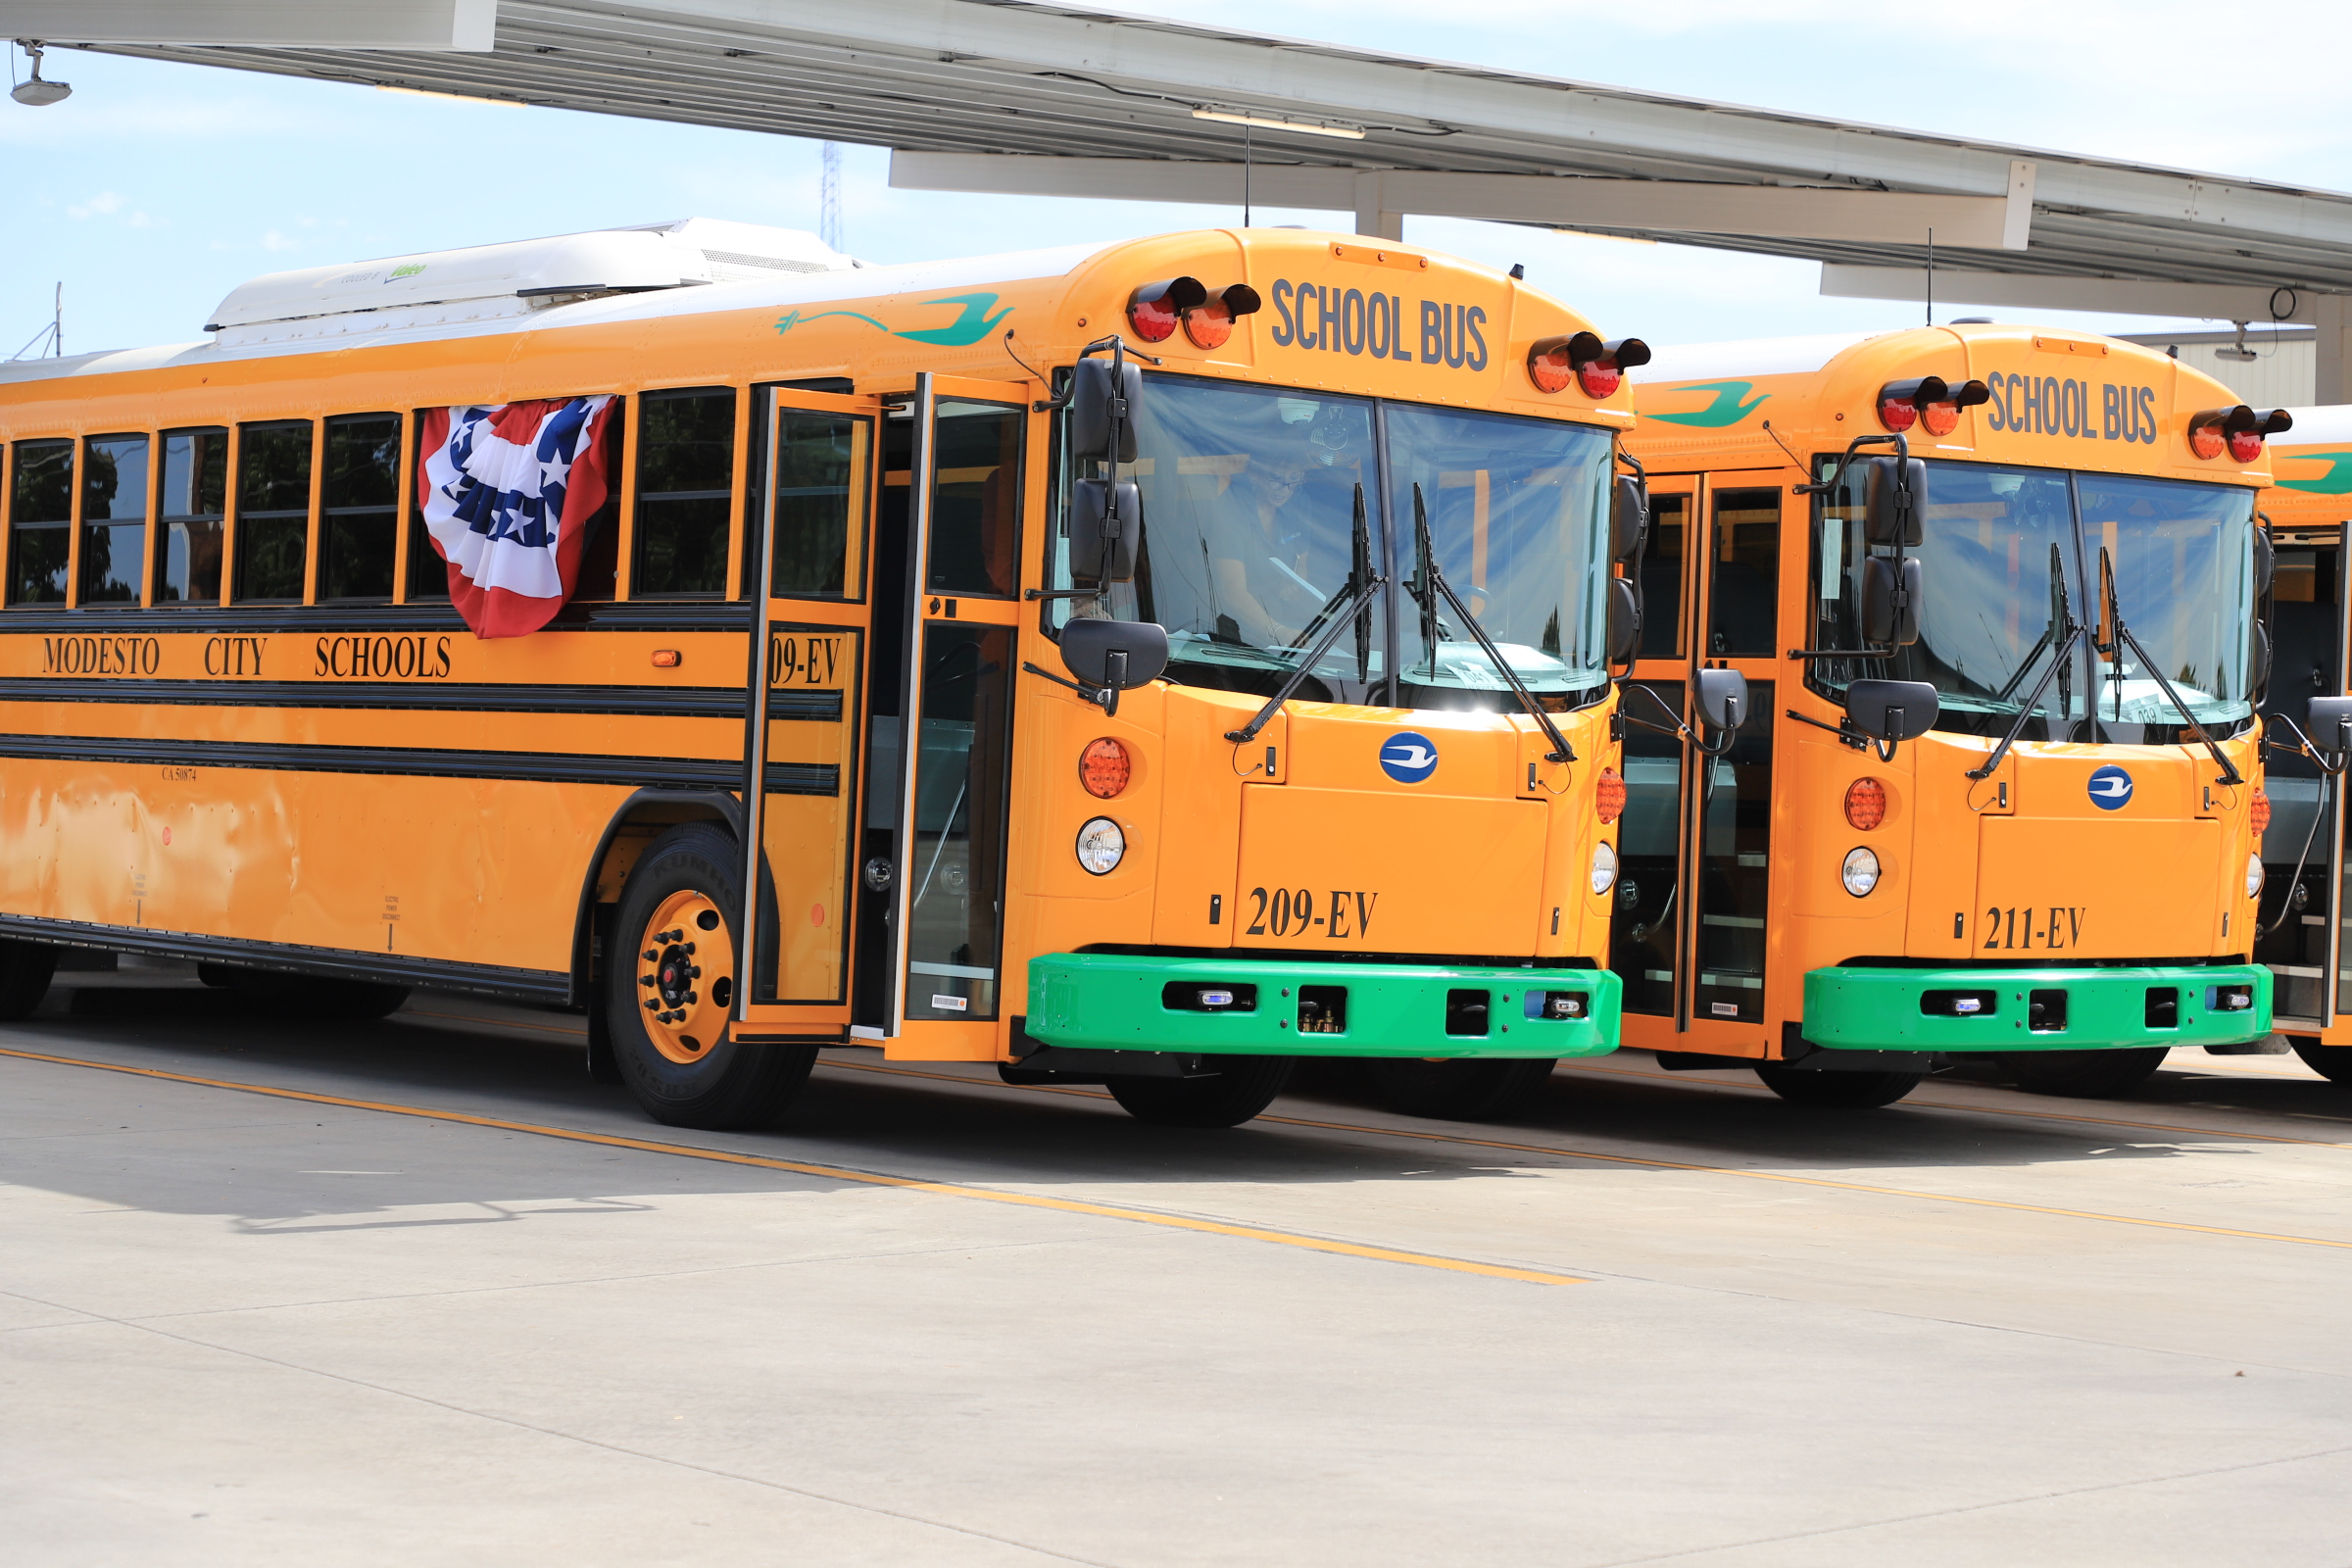 two buses transportation yard and modesto city schools